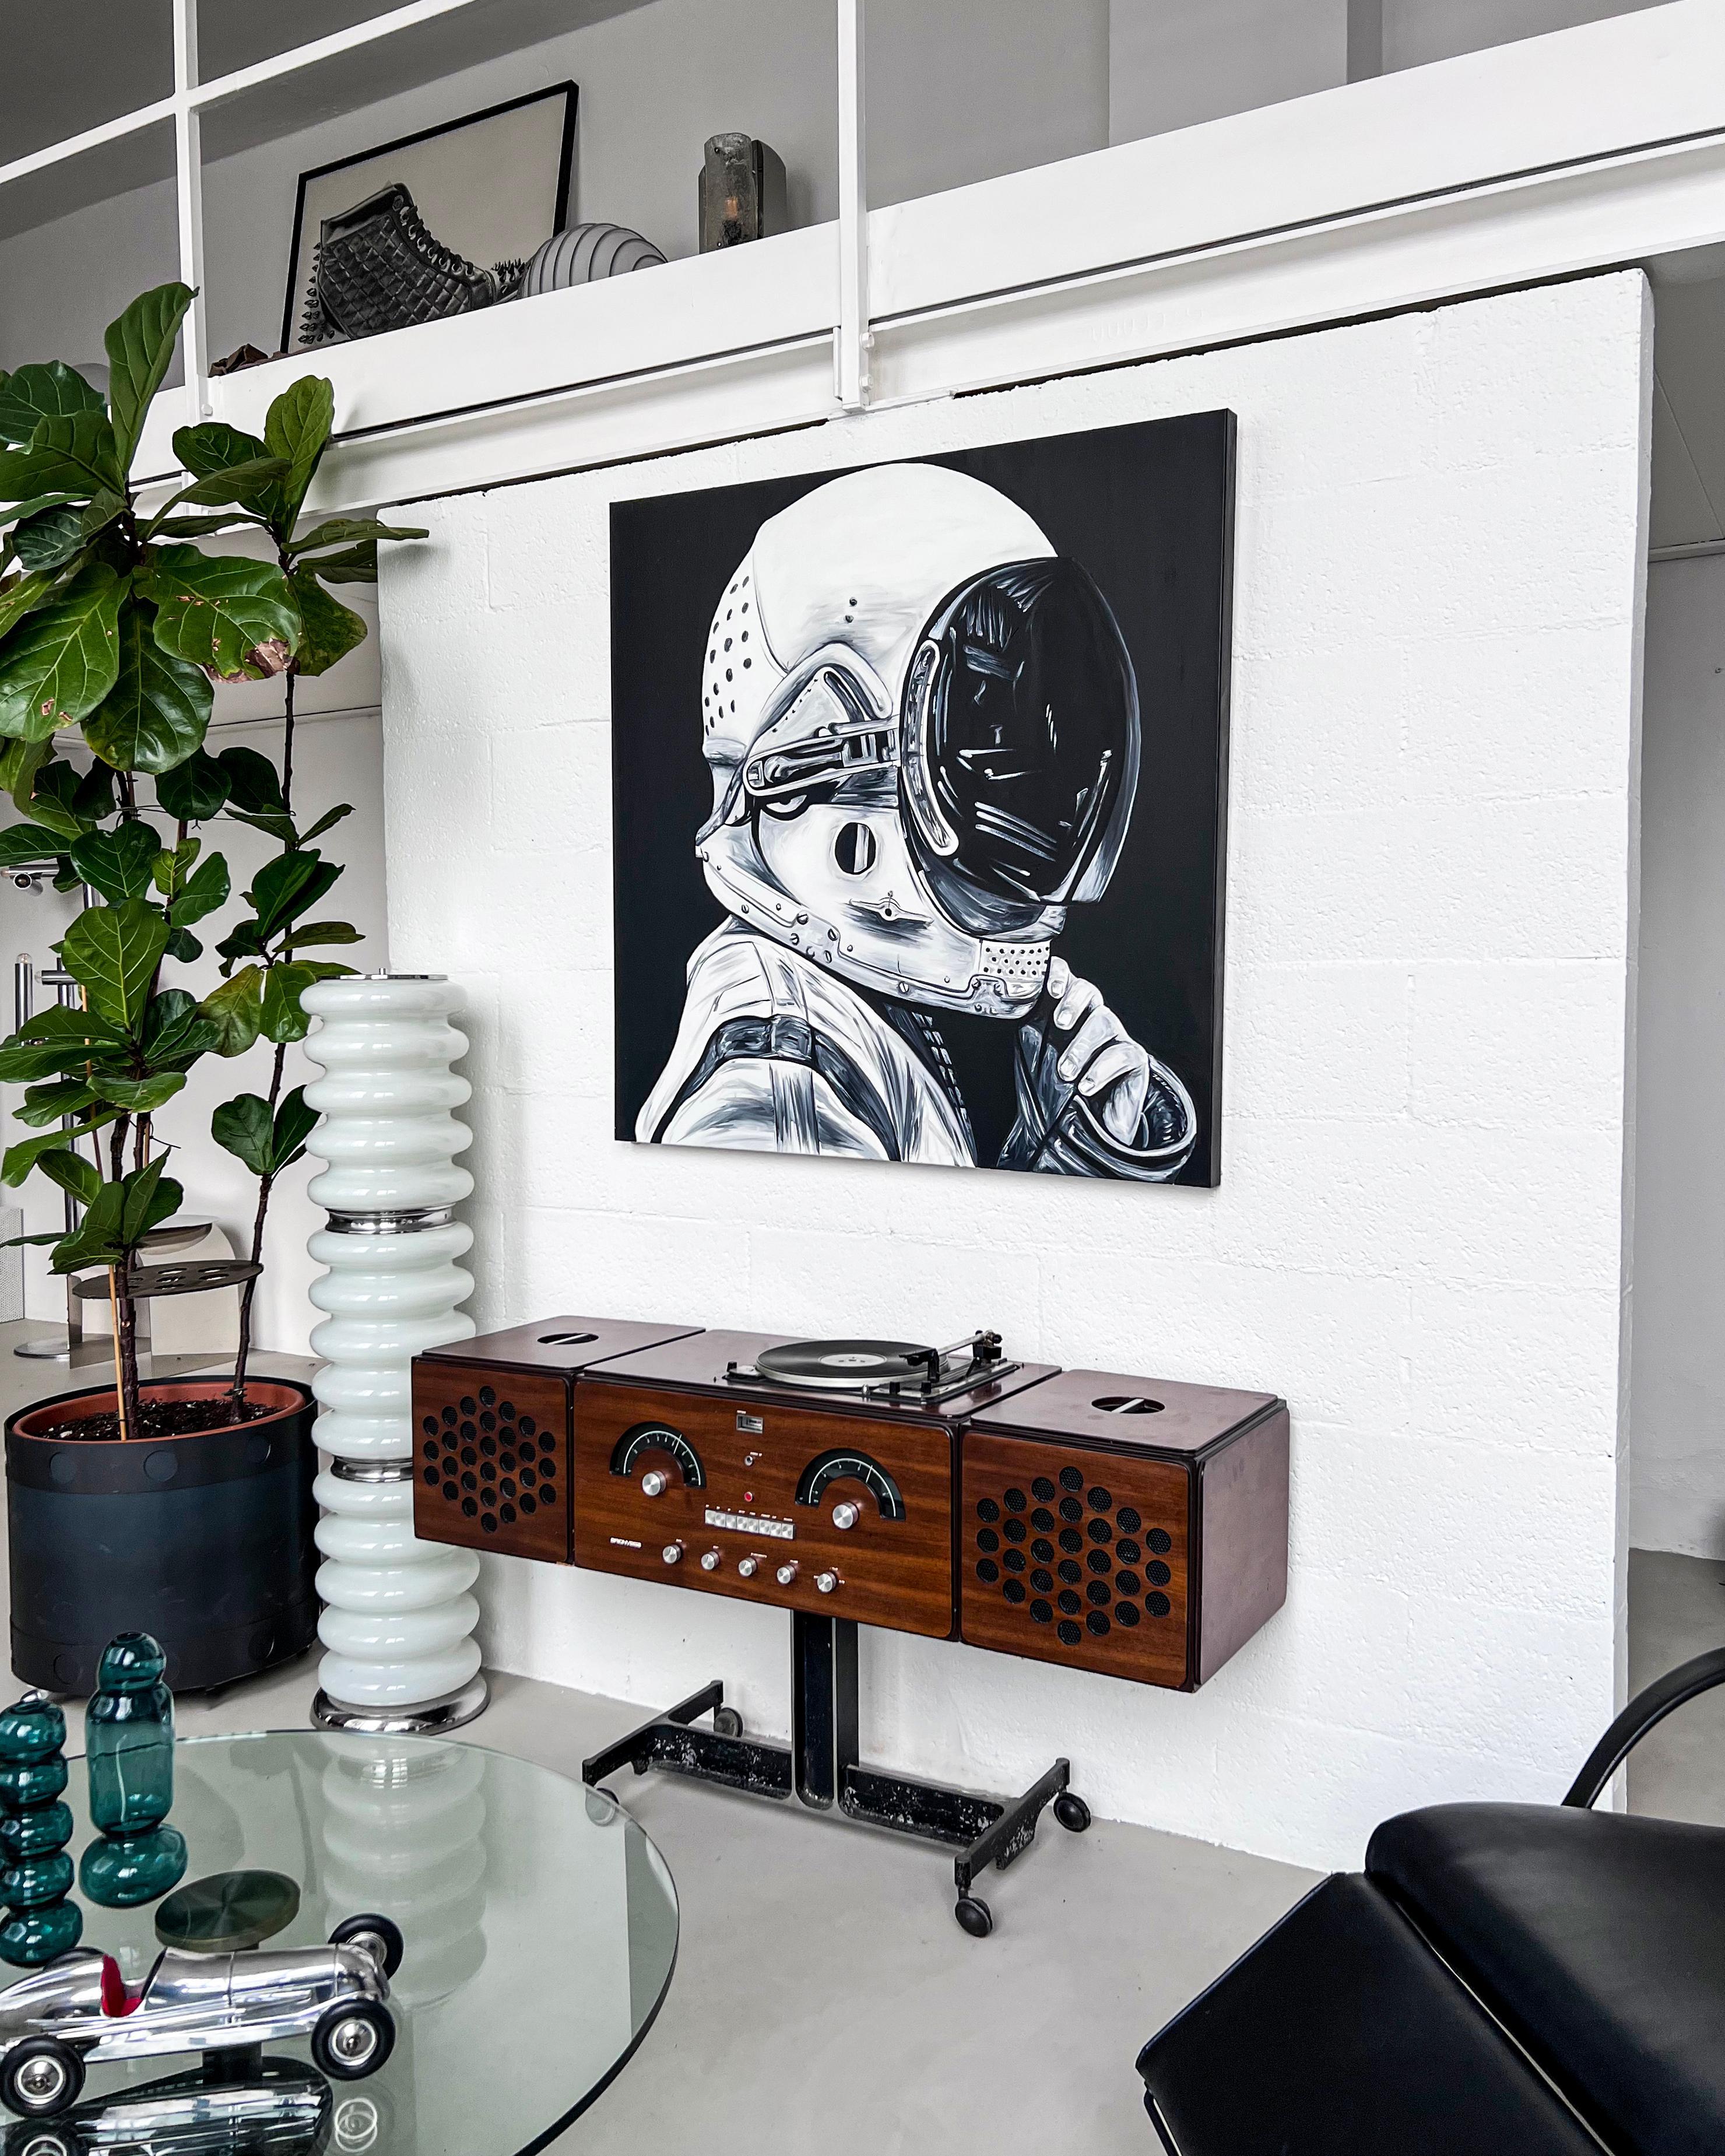 Contemporary Artwork - Astronaut - Cosmonaut By Ricardo Rodriguez

Black and white original painting (not a print), depicting a cosmonaut in his space suit and helmet. It is the work of Spanish artist Ricardo Rodriguez, and is a big canvas measuring